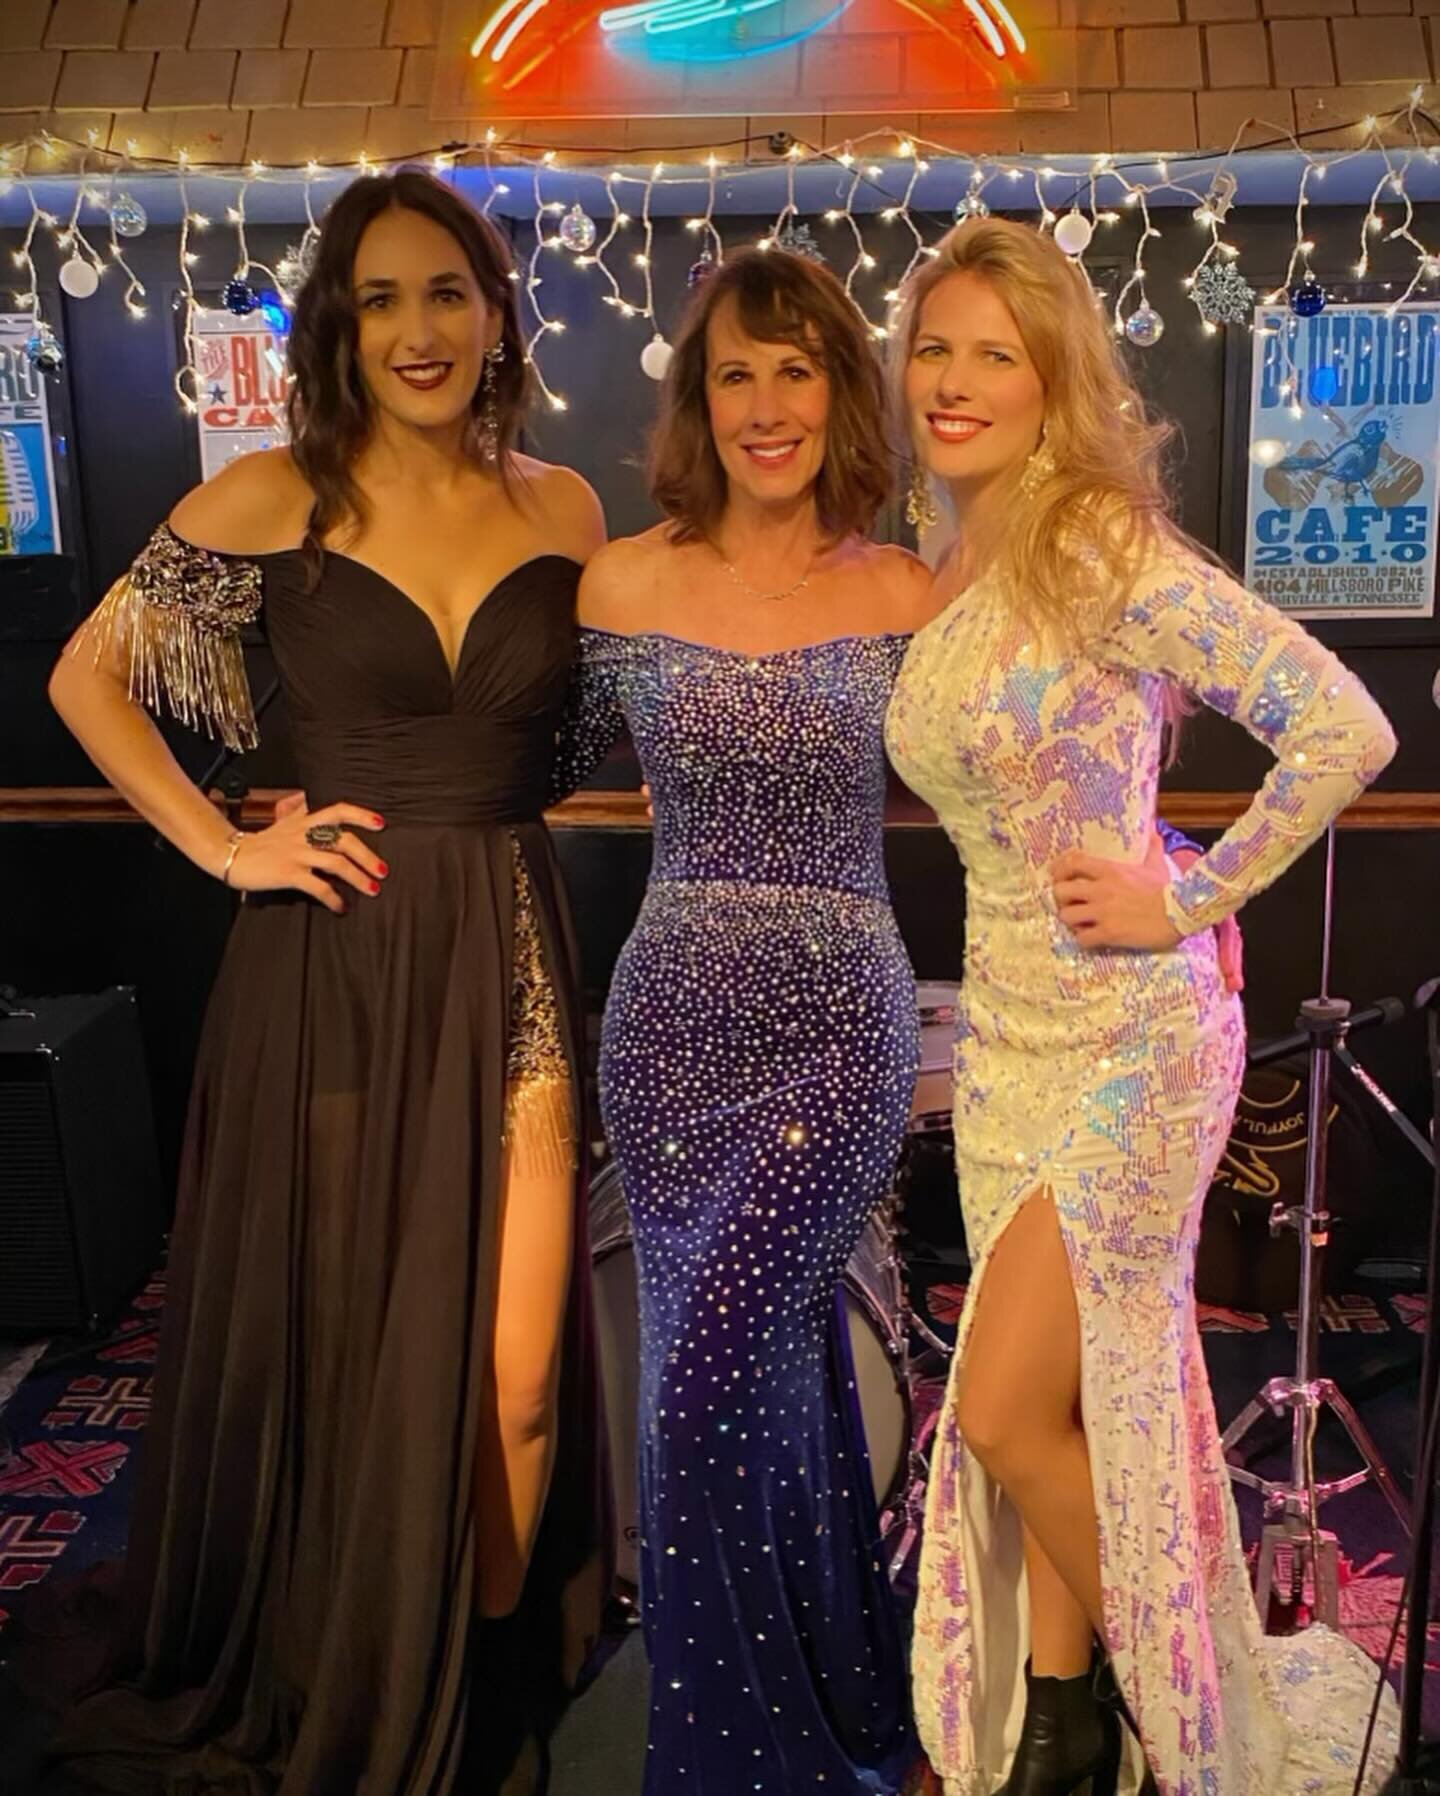 A KELLEY CHRISTMAS album release show last night @bluebirdcafetn in our @johnathankayne gowns. 

Go to the link in my bio and stream it anywhere you listen to music!